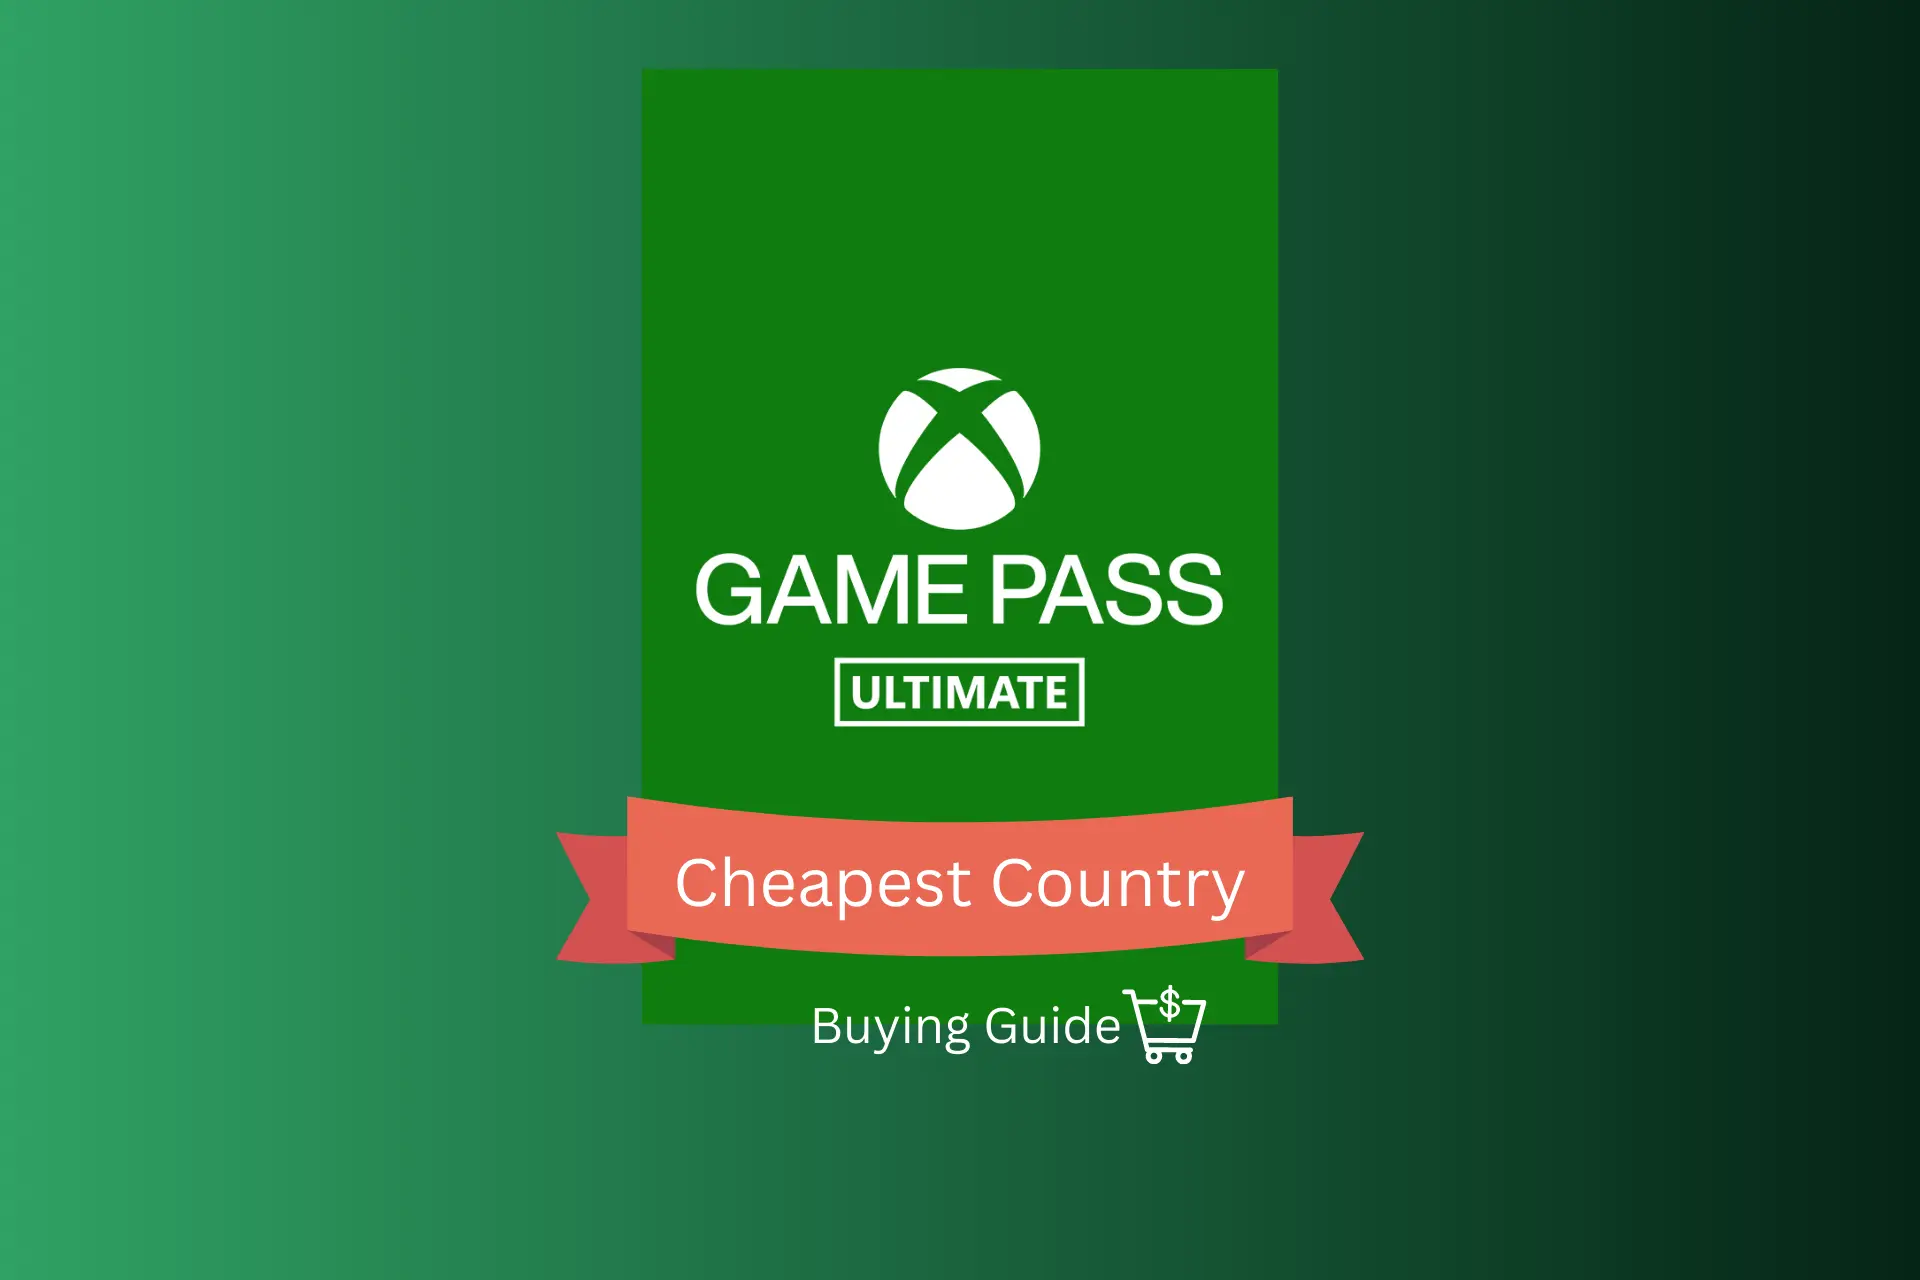 Xbox Game Pass Plans, Explained: How Much Does a Subscription Cost